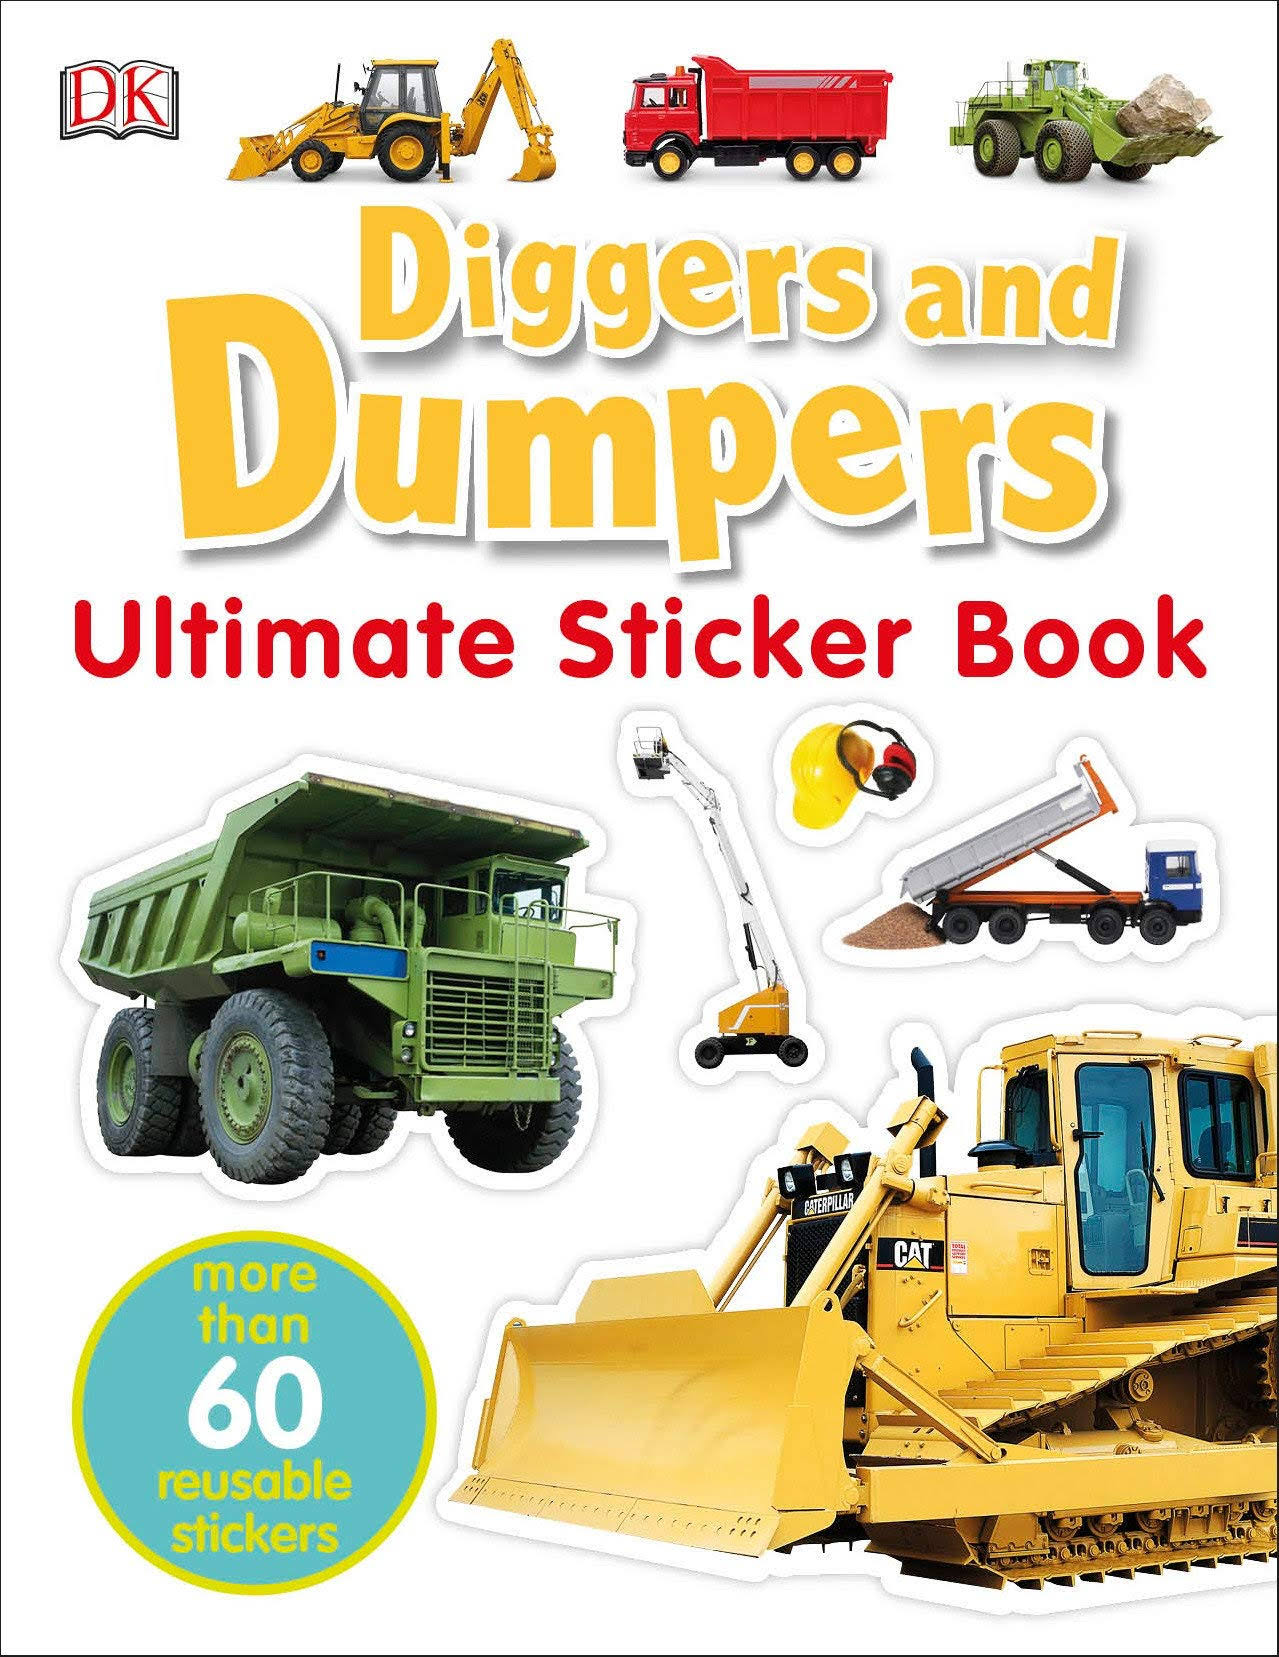 DK Digers and Dumpers Ultimate Sticker Book